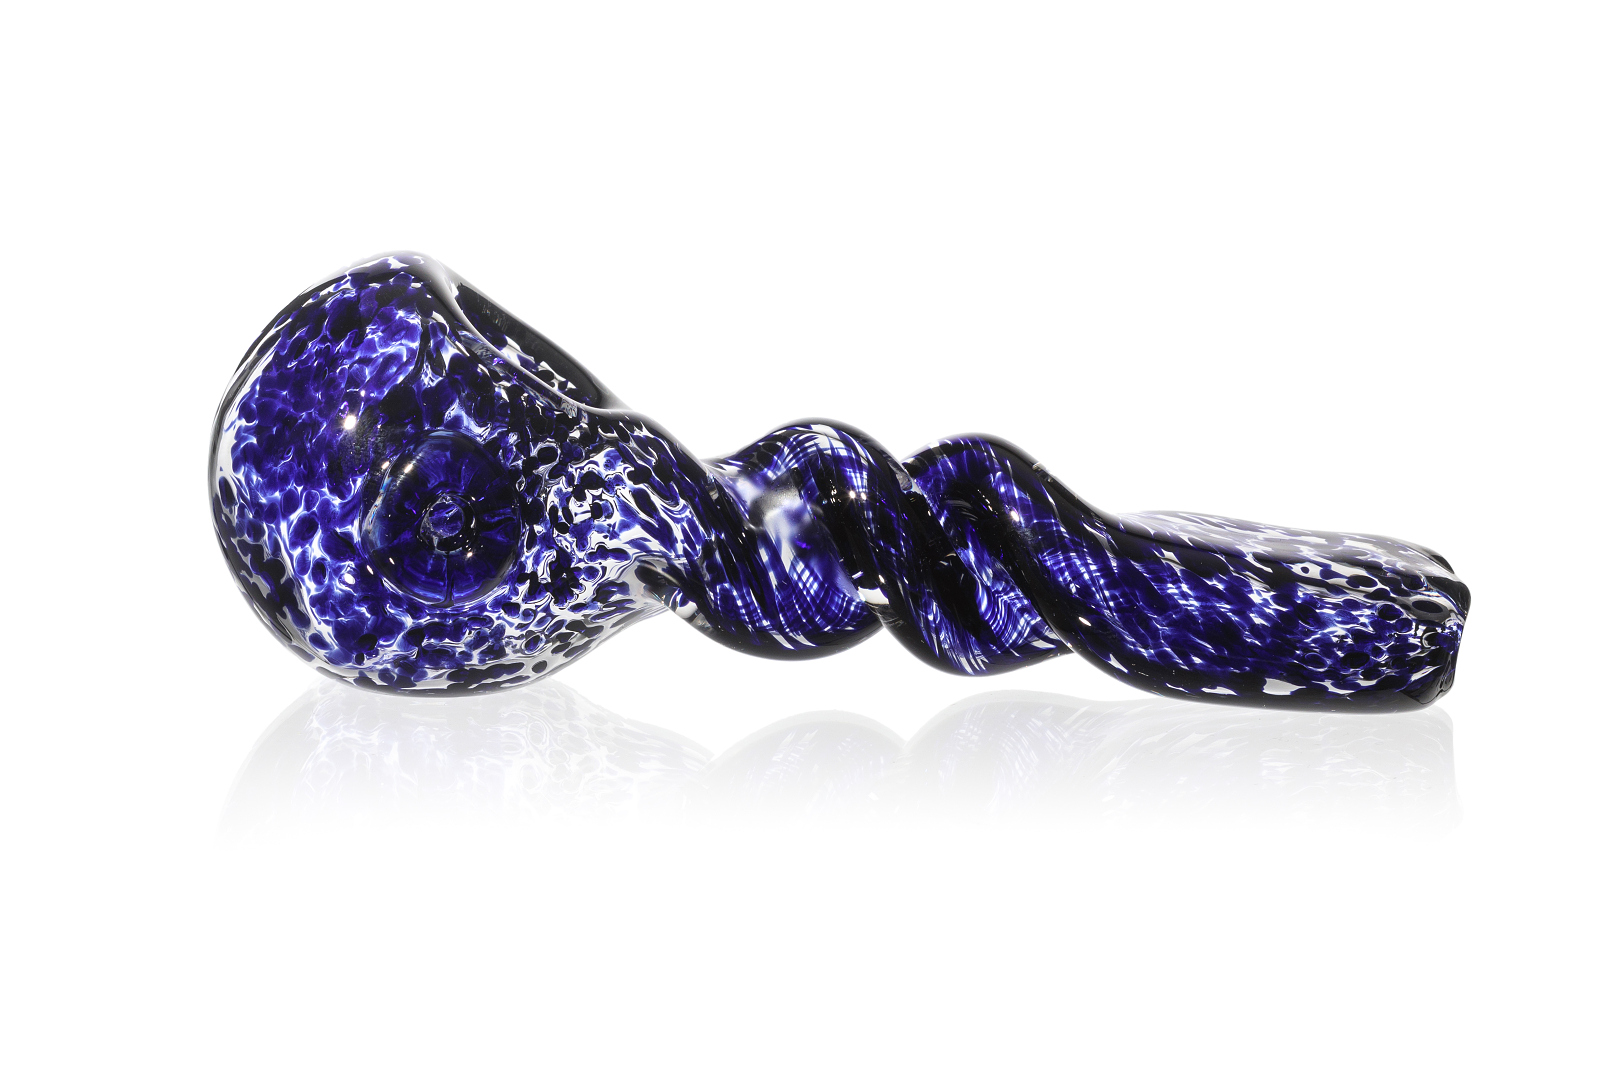 Color Changing Glass Pipe  Glass Smoking Pipe  Glass Pipes  Glass Spoon Pipe  Smoking Bowl  Glass Smoking Bowl